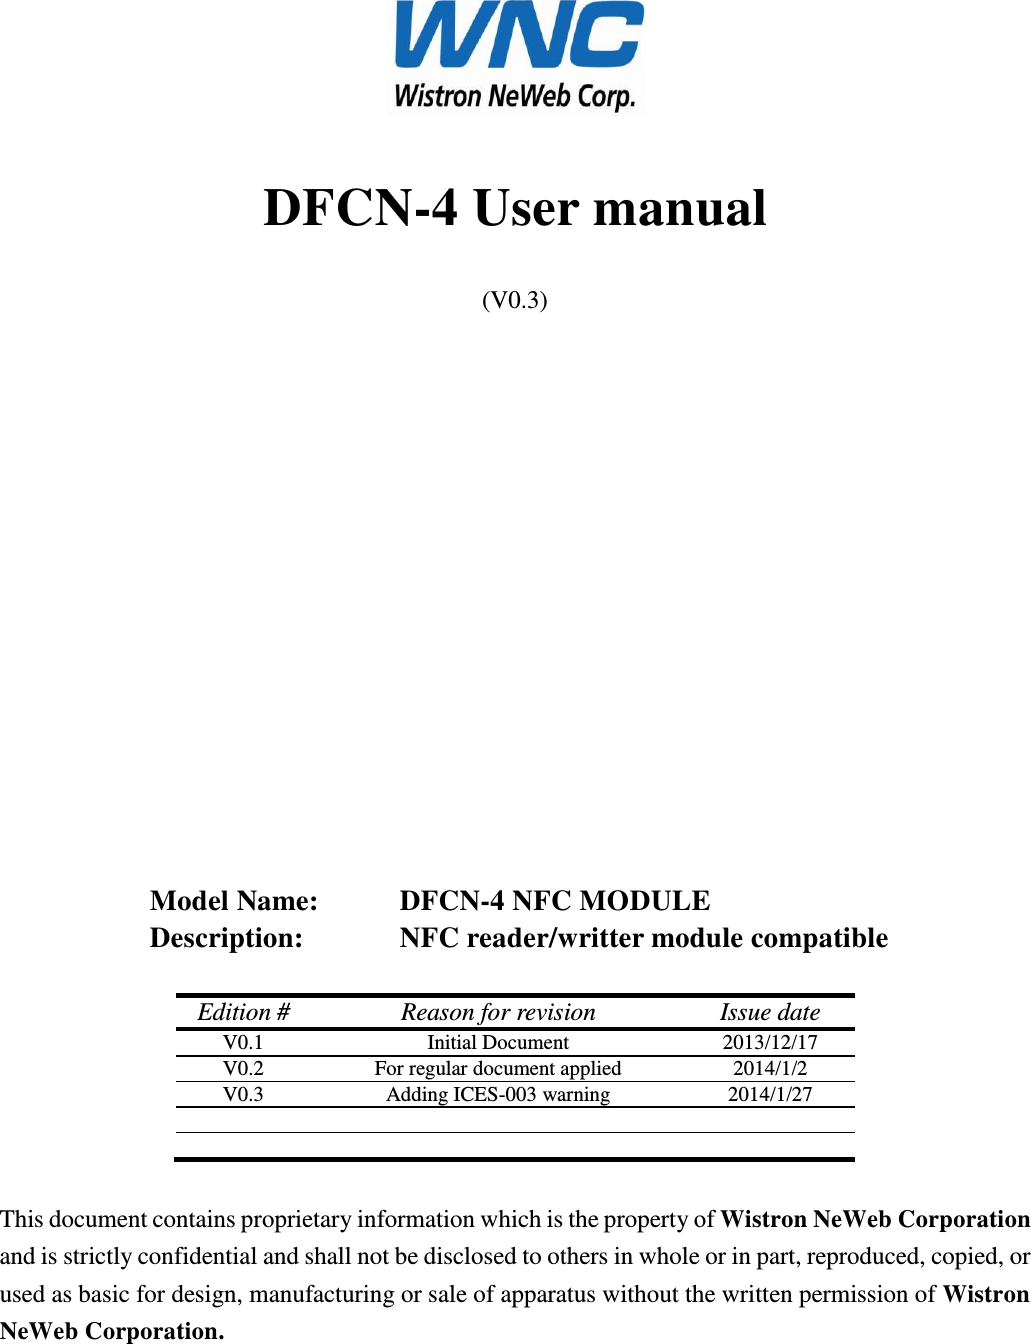  DFCN-4 User manual (V0.3)                Model Name:     DFCN-4 NFC MODULE Description:     NFC reader/writter module compatible  Edition # Reason for revision Issue date V0.1 Initial Document 2013/12/17 V0.2 For regular document applied 2014/1/2 V0.3 Adding ICES-003 warning 2014/1/27        This document contains proprietary information which is the property of Wistron NeWeb Corporation and is strictly confidential and shall not be disclosed to others in whole or in part, reproduced, copied, or used as basic for design, manufacturing or sale of apparatus without the written permission of Wistron NeWeb Corporation. 